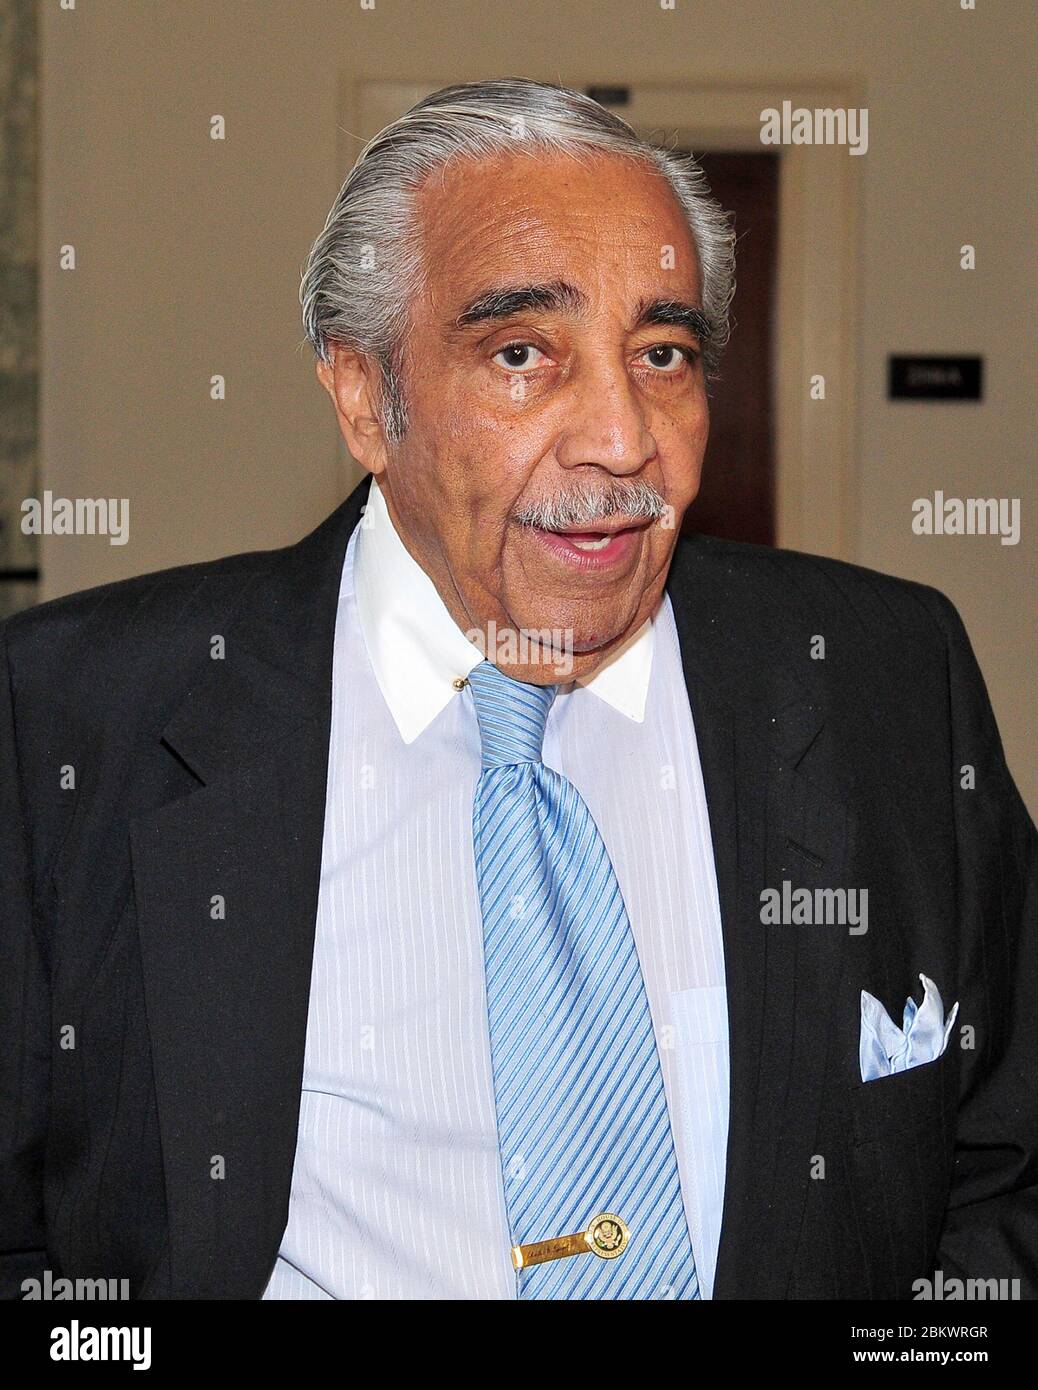 United States Representative Charlie Rangel (Democrat of New York) arrives at his Capitol Hill office on Wednesday, December 1, 2010.Credit: Ron Sachs / CNP  (RESTRICTION: NO New York or New Jersey Newspapers or newspapers within a 75 mile radius of New York City) / MediaPunch Stock Photo